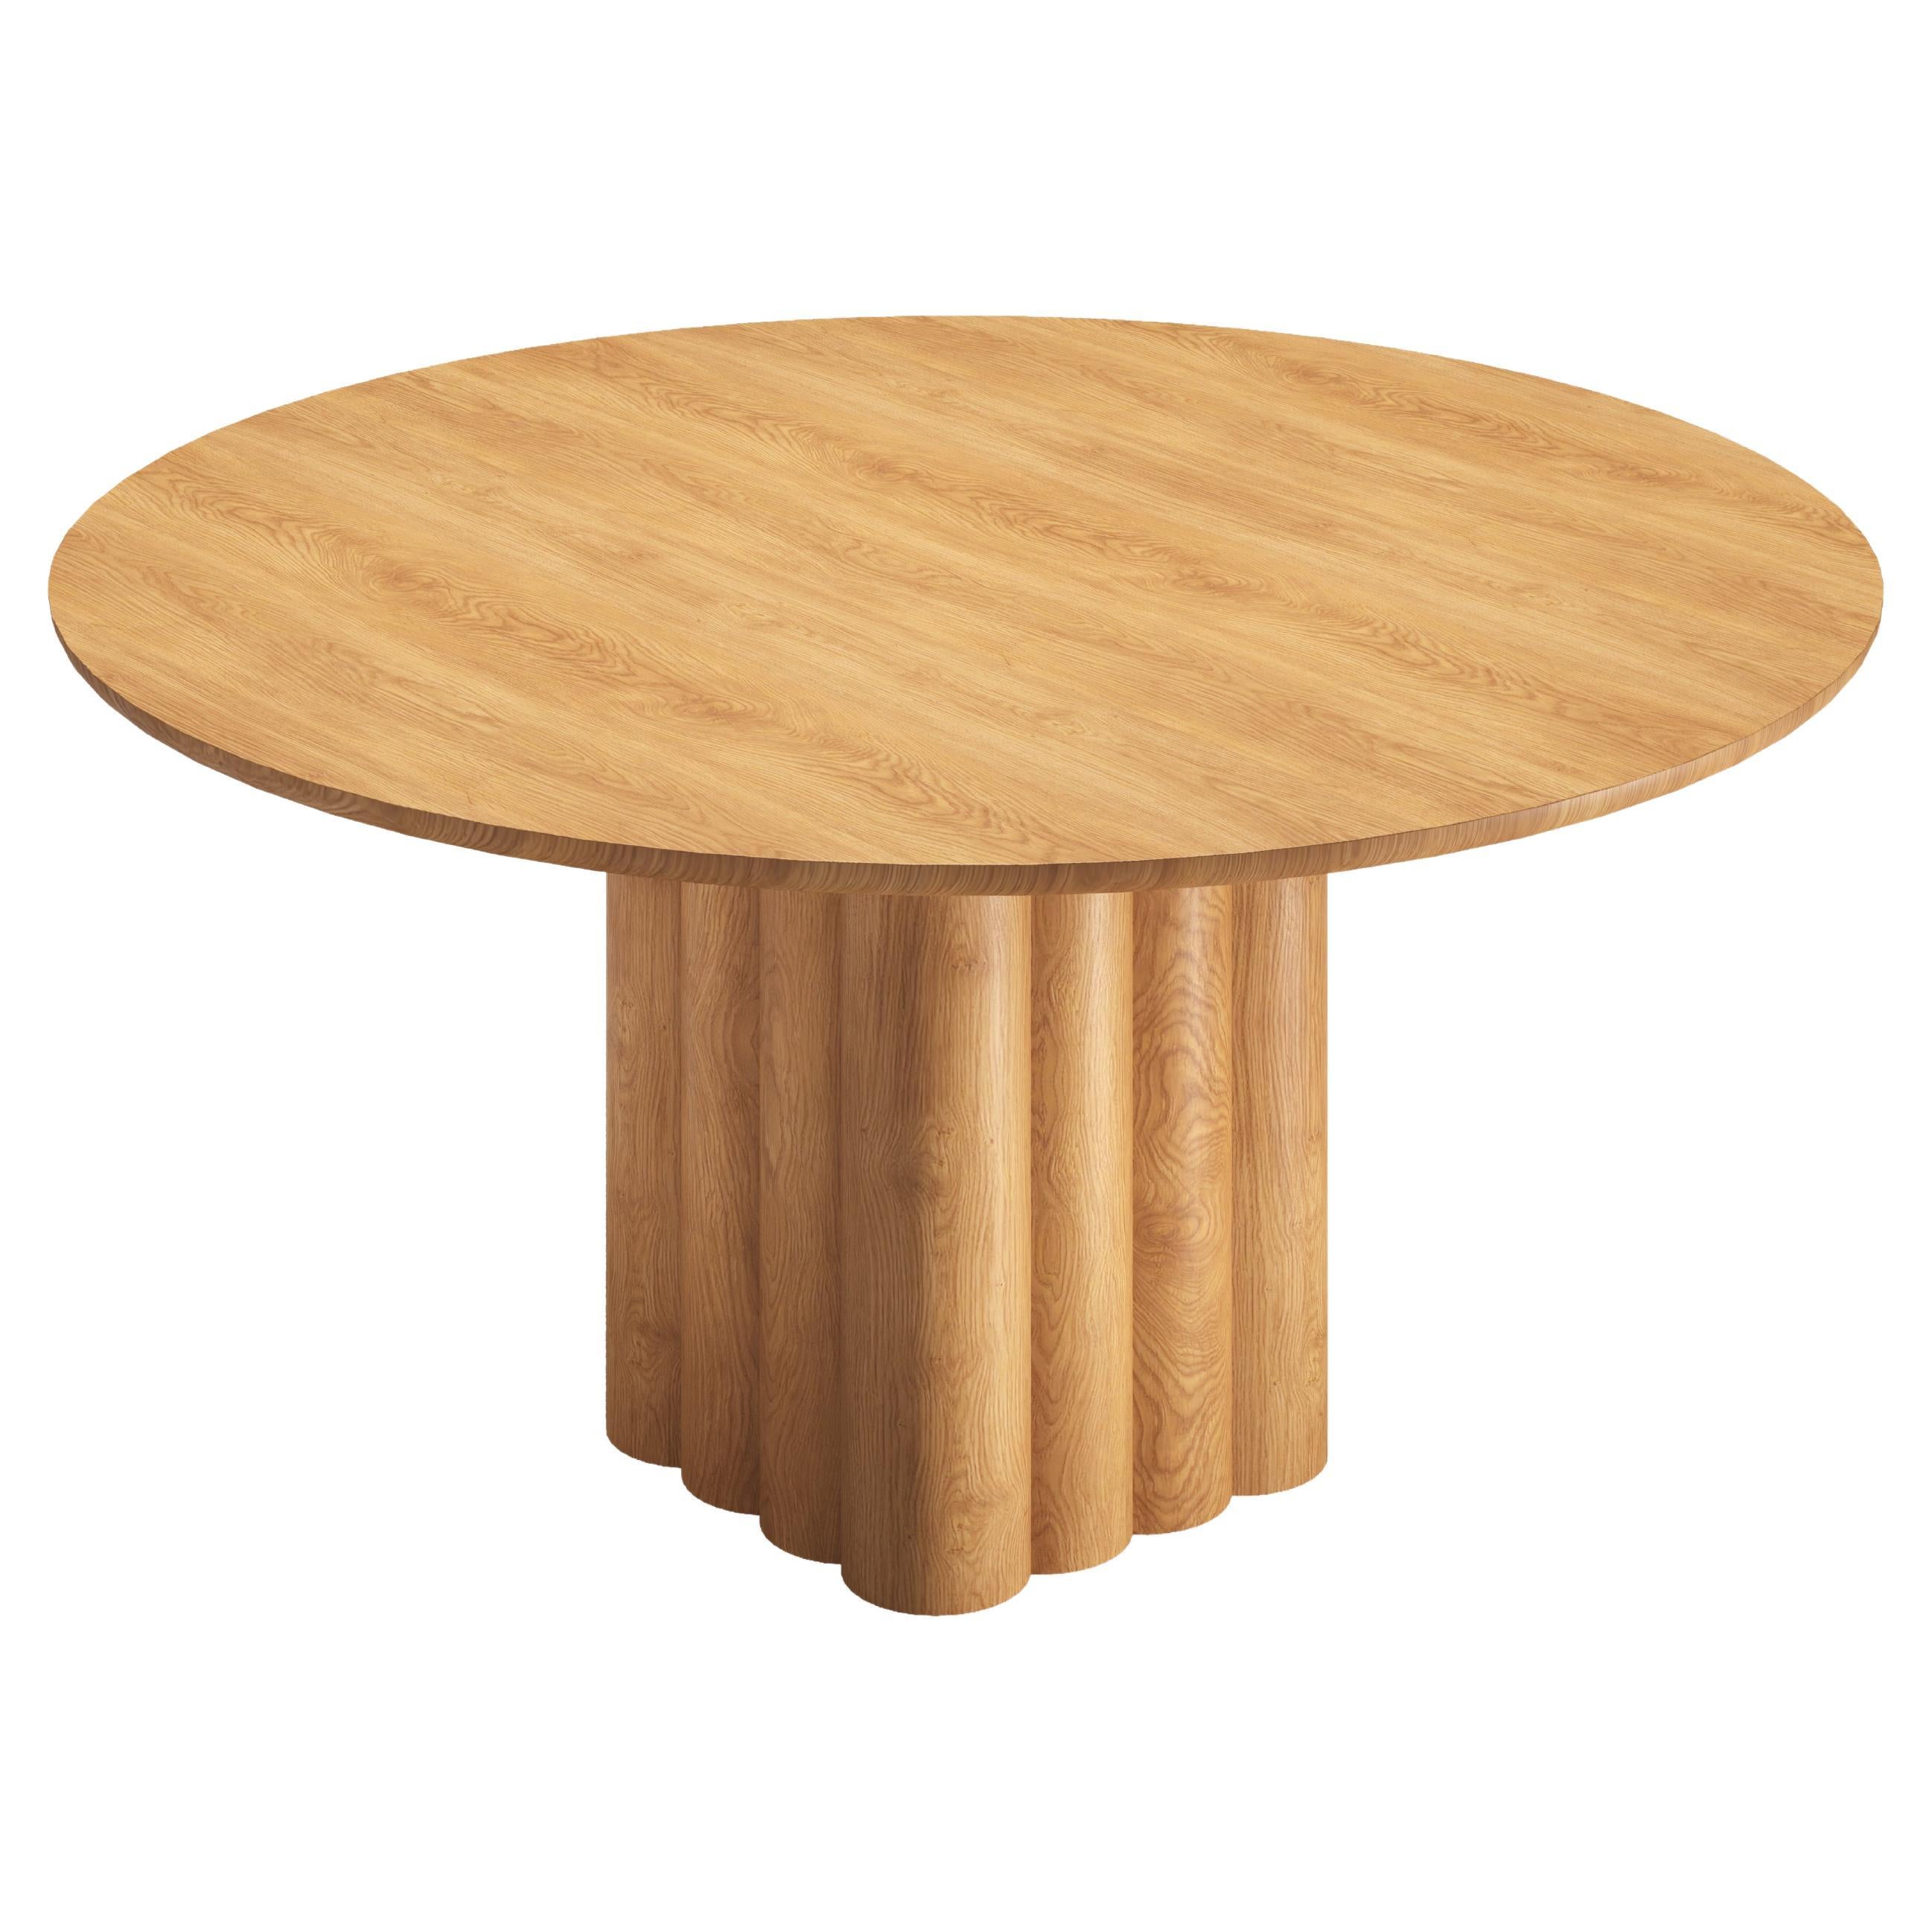 Round Dining Table 'Plush' by Dk3, Natural Oak, 150 cm For Sale